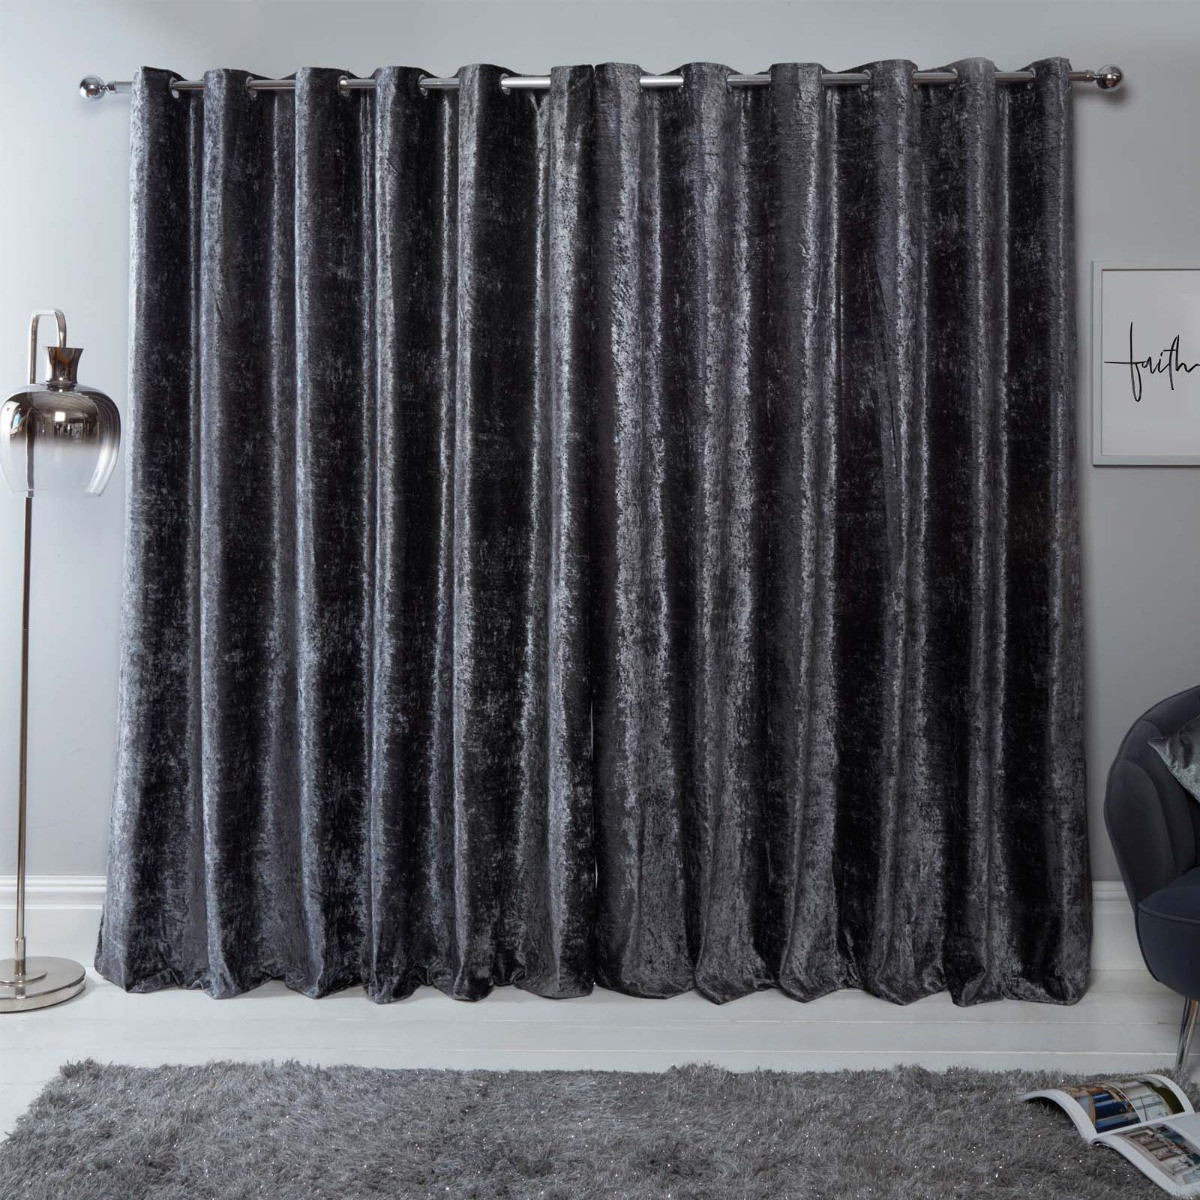 Sienna Home Crushed Velvet Eyelet Curtains - Charcoal Grey 46" x 72">